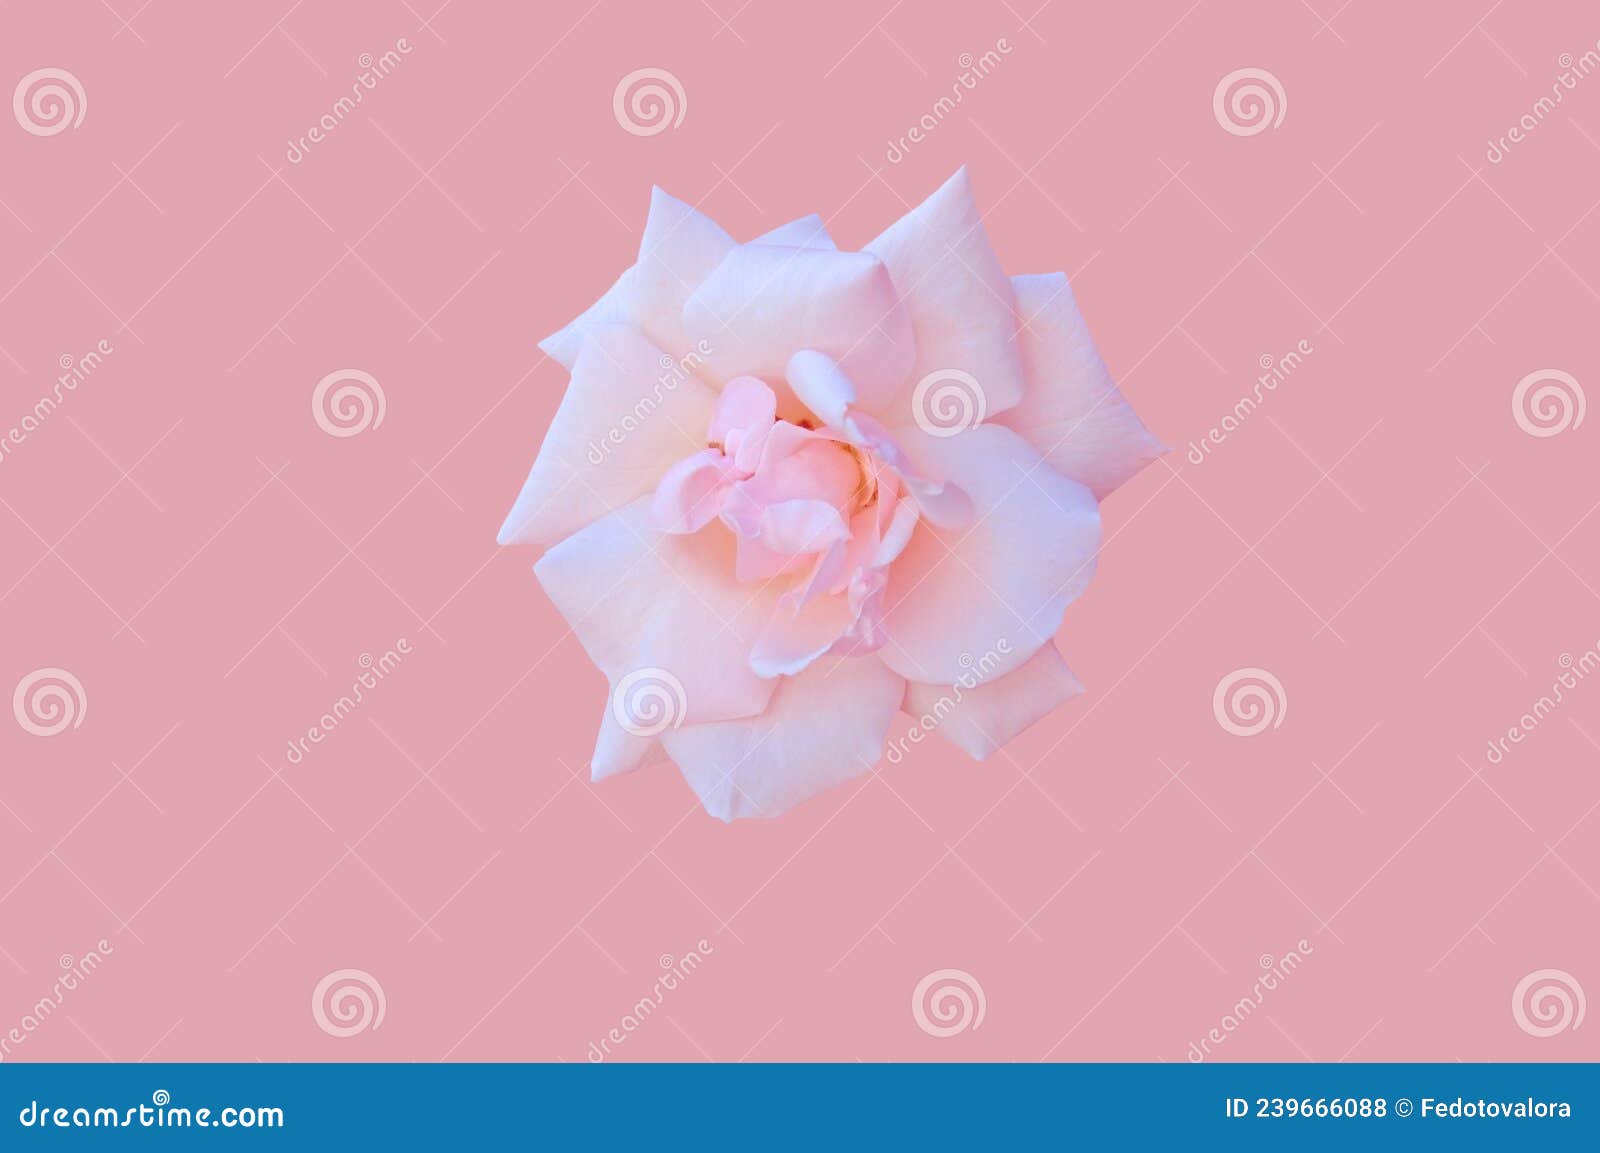 One Pink White Bright Beautiful Colorful Rose Top View Closeup on a ...